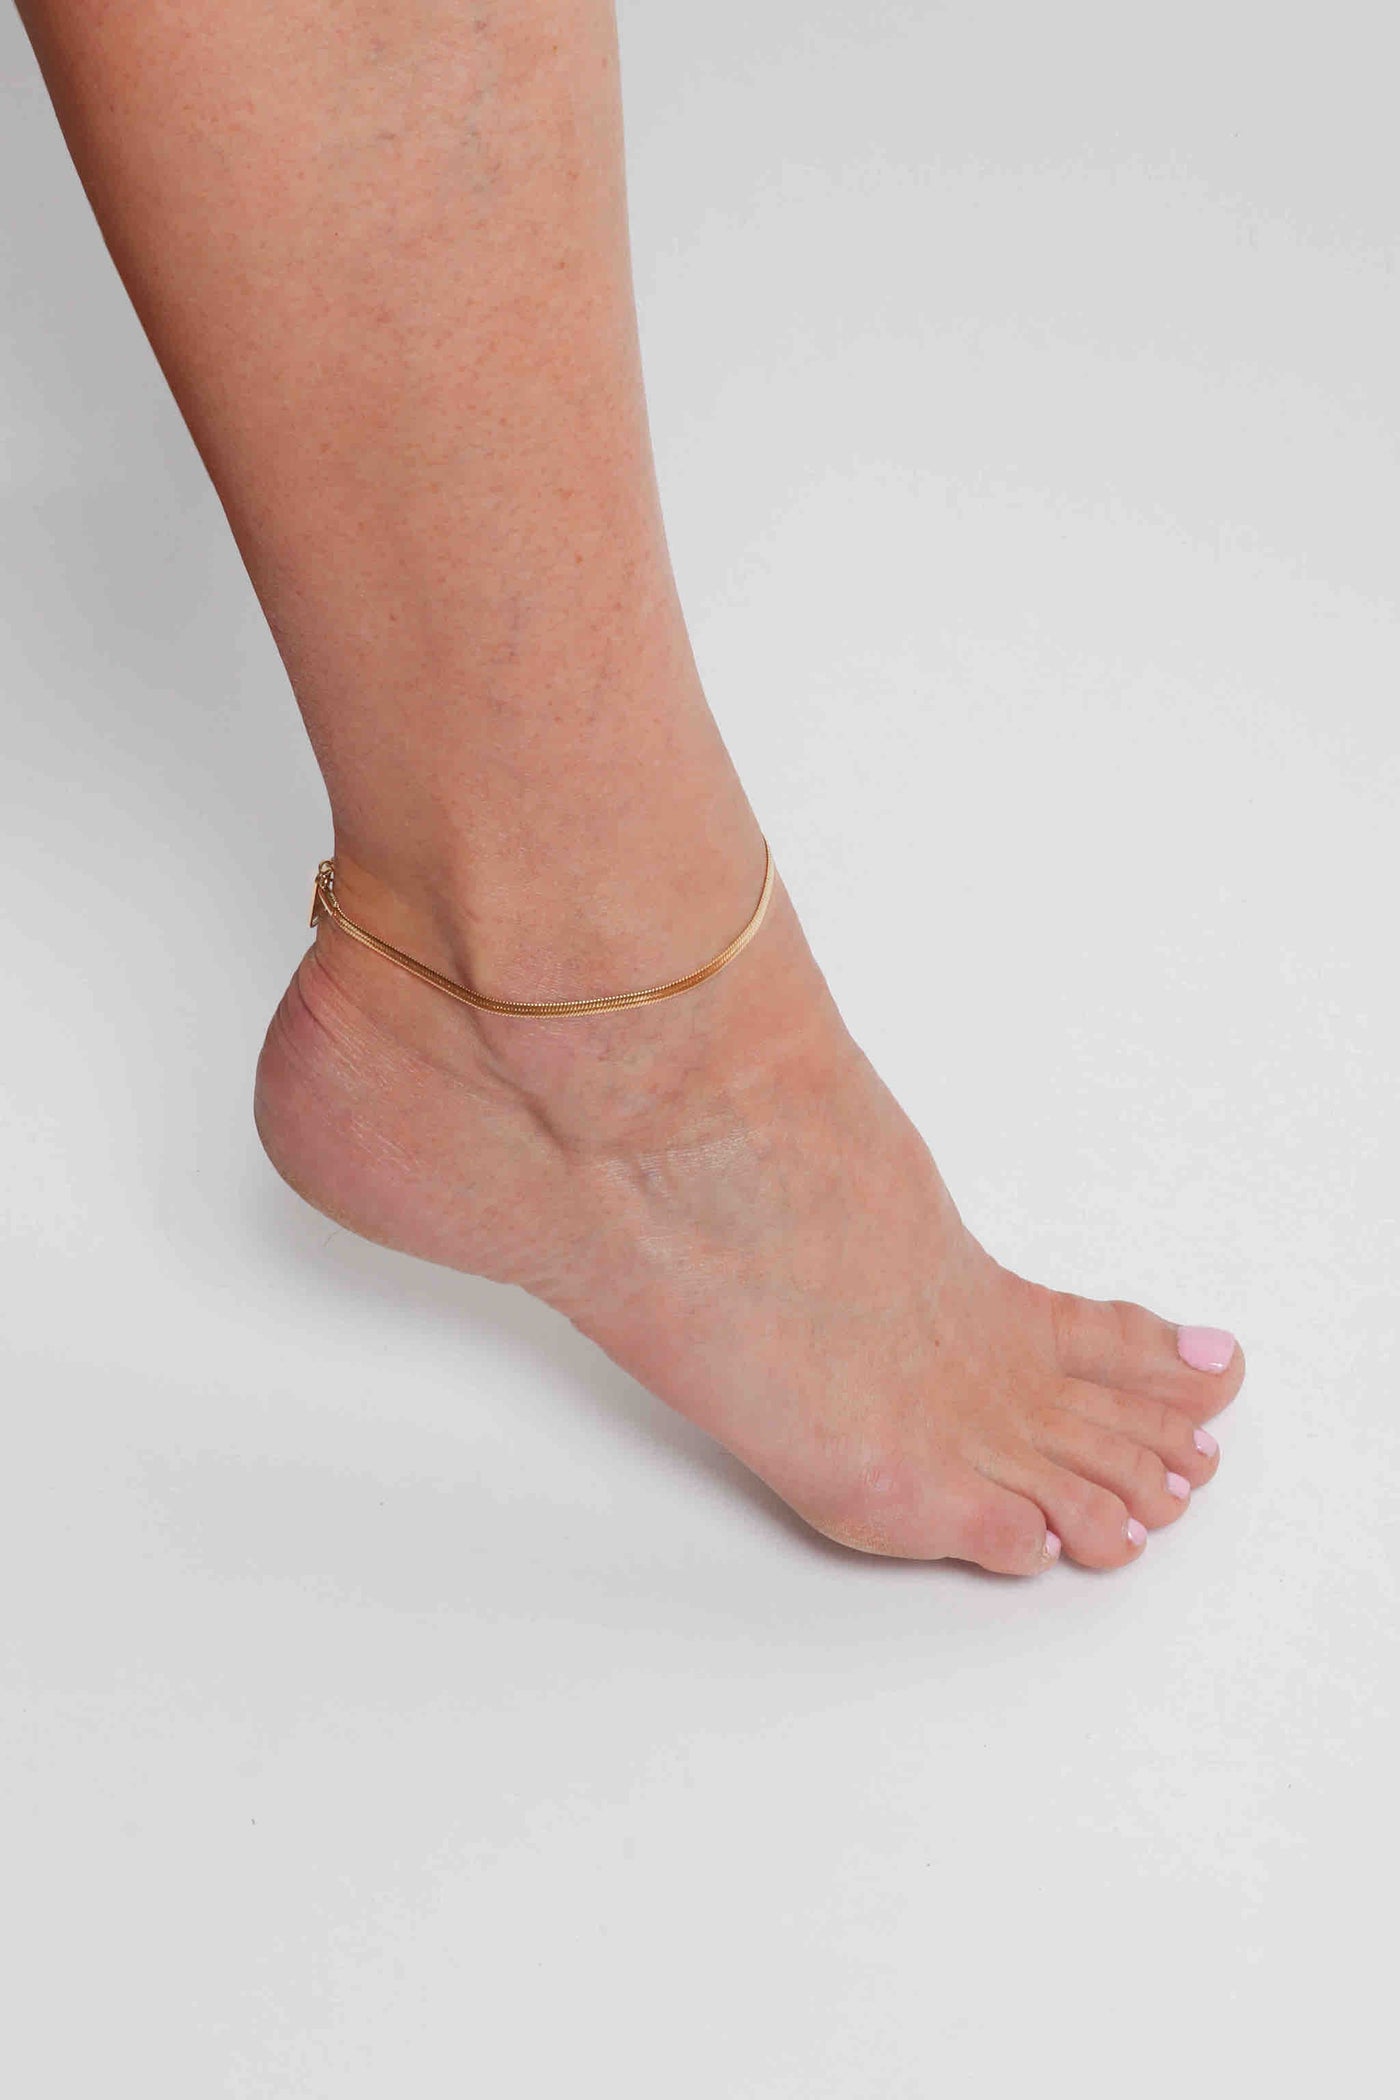 Marrin Costello wearing Marrin Costello Jewelry 3mm herringbone snake chain anklet with lobster clasp closure. Waterproof, sustainable, hypoallergenic. 14k gold plated stainless steel.